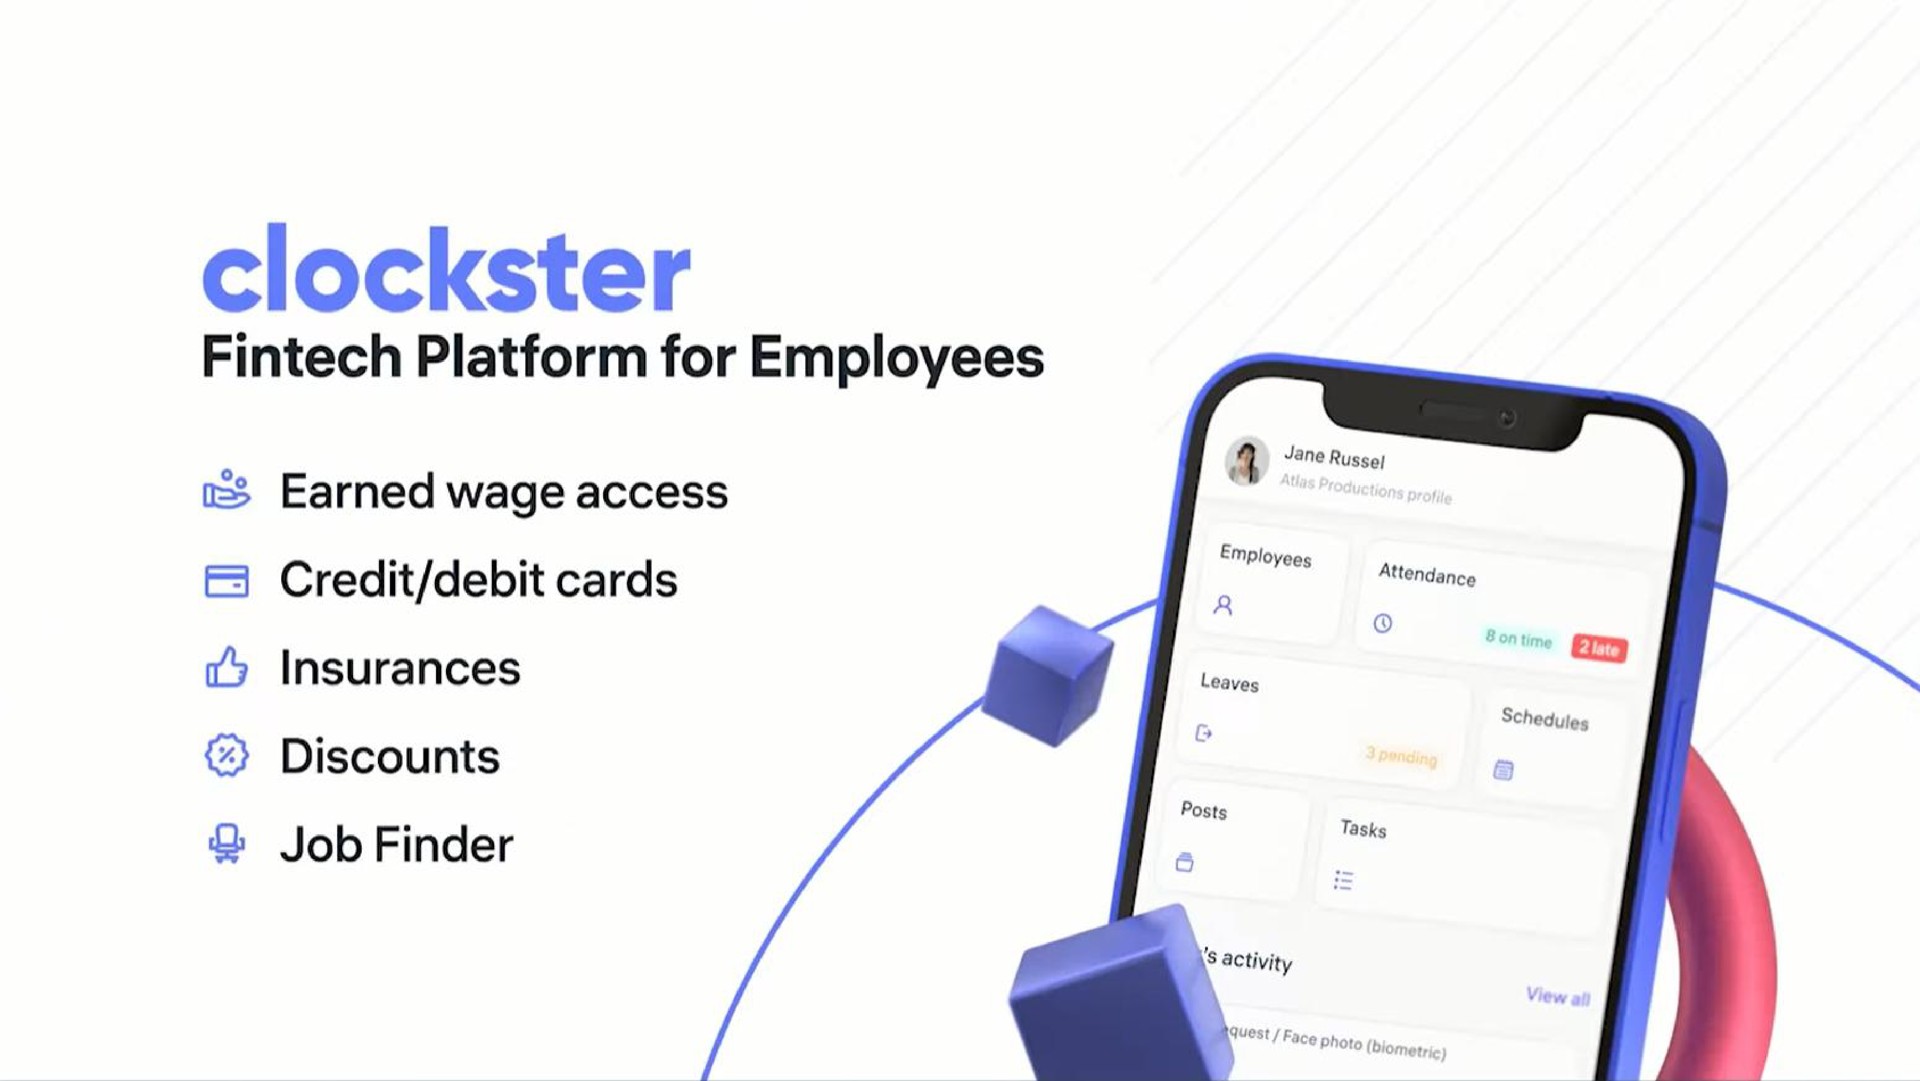 platform for employees earned wage access credit debit cards insurances discounts job finder | Clockster